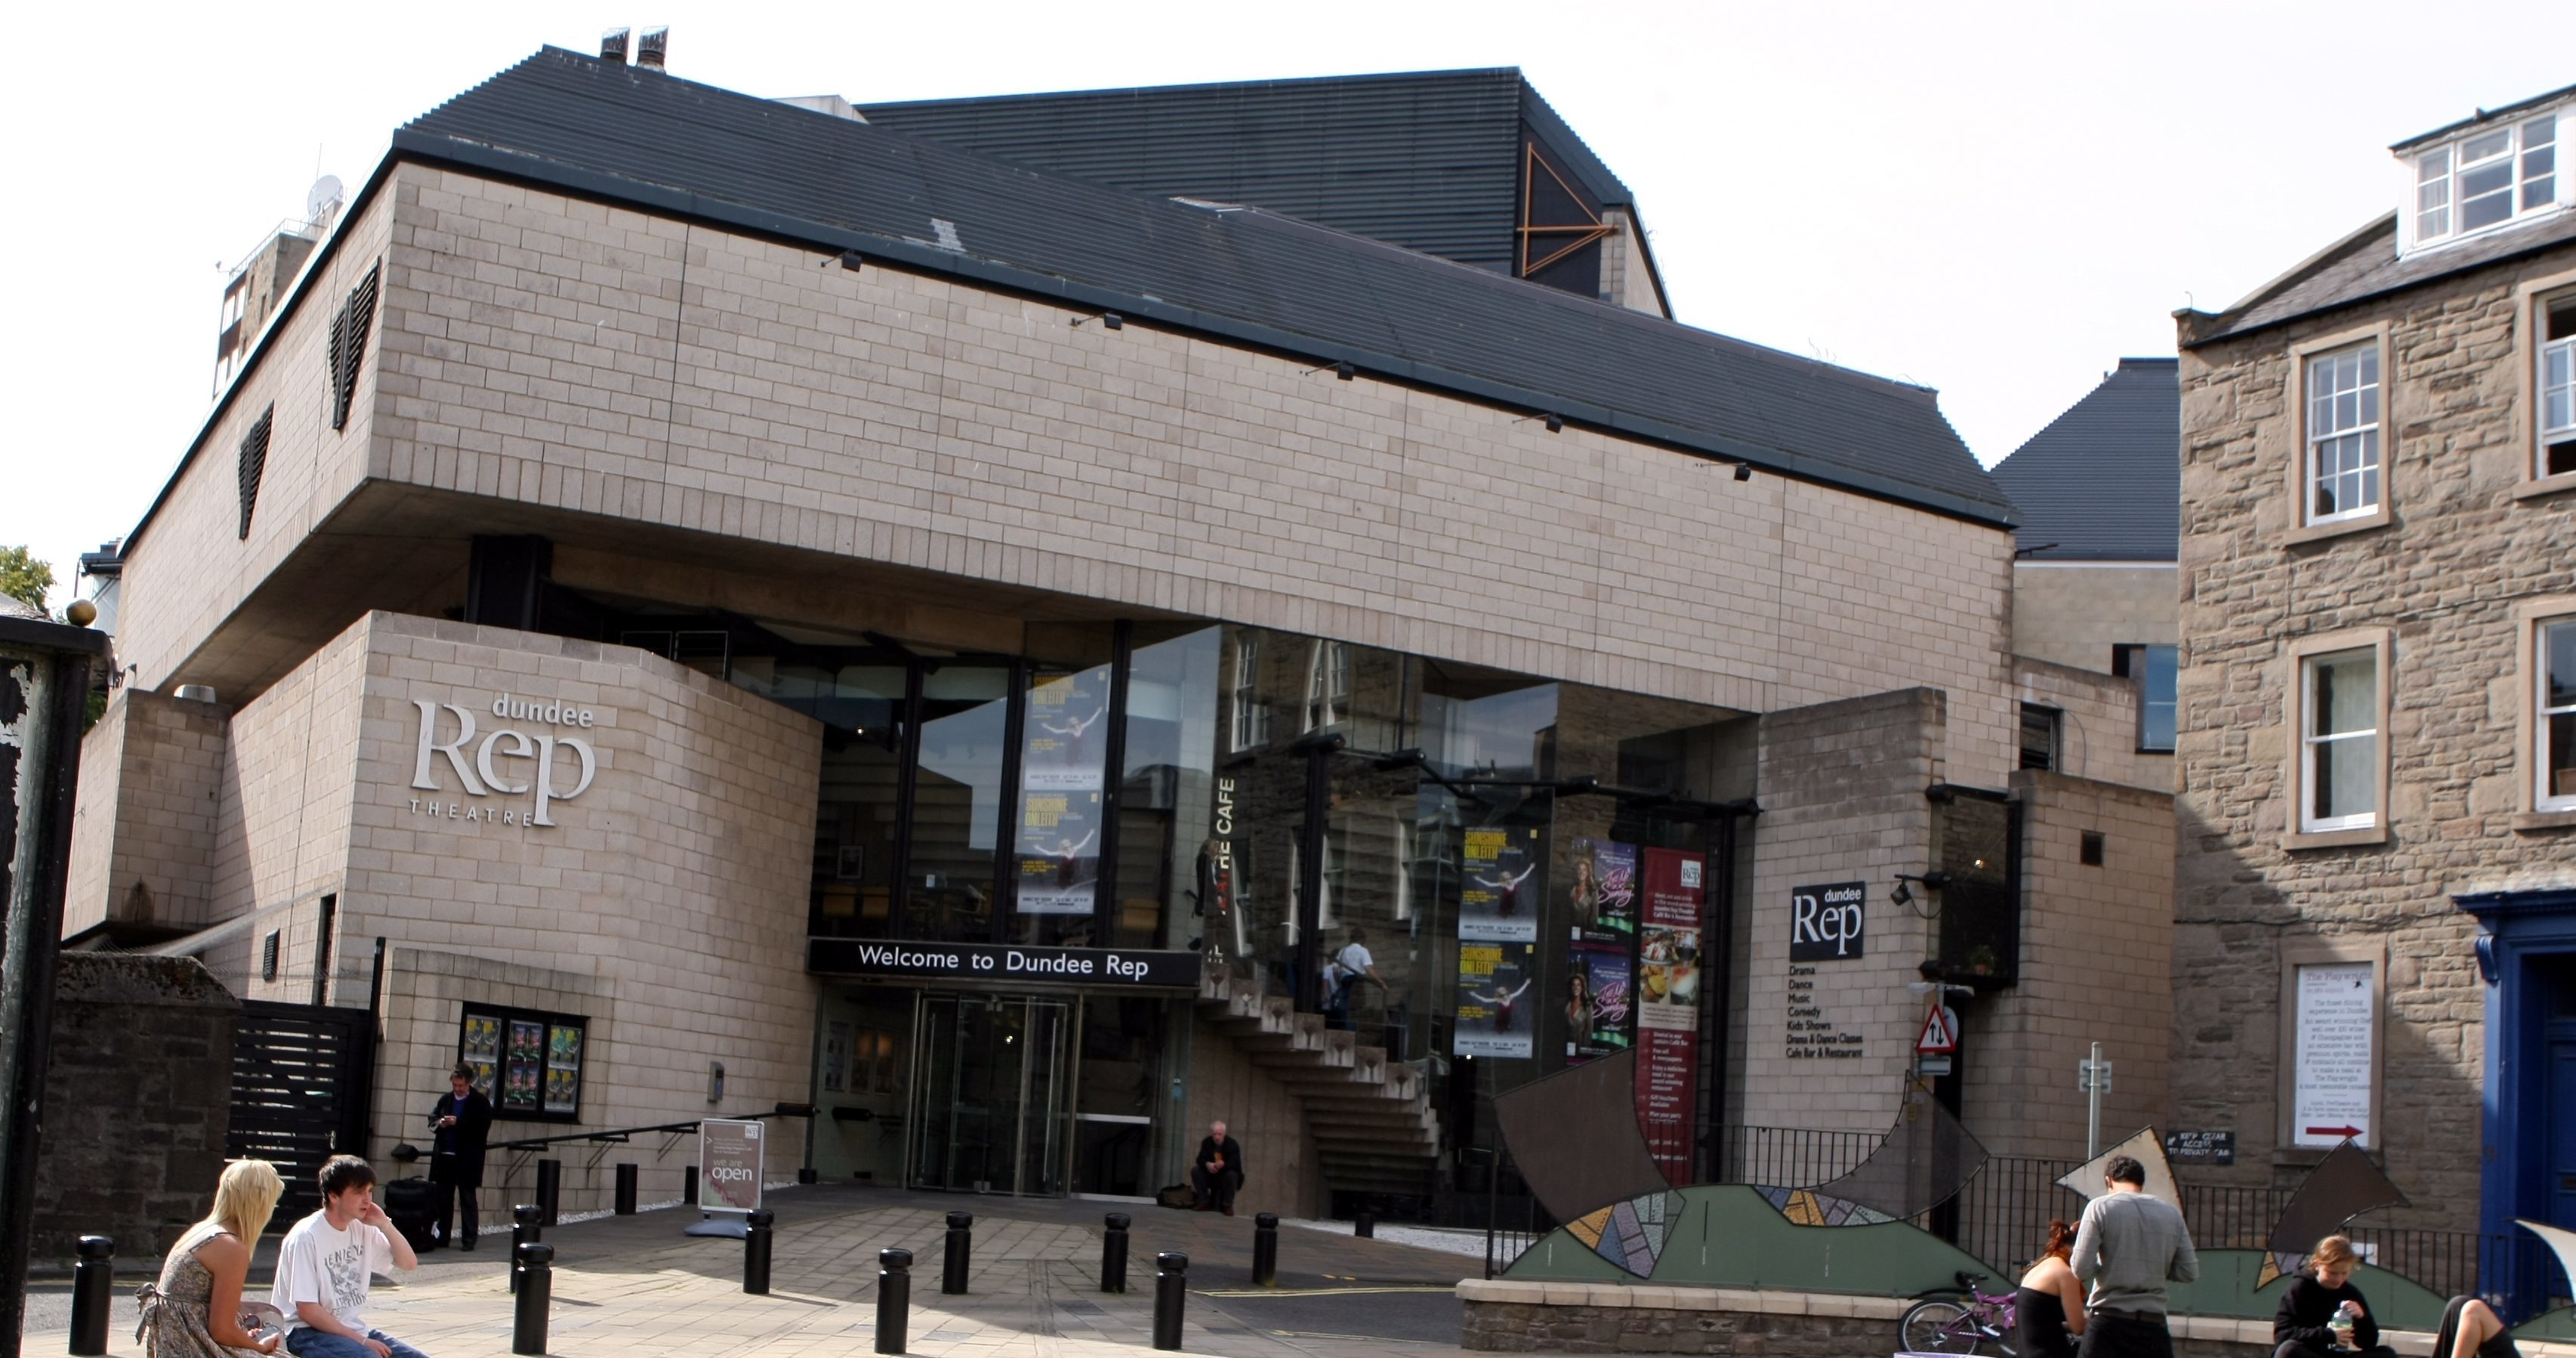 The Dundee Rep Theatre has been voted among the top ten buildings in Scotland.